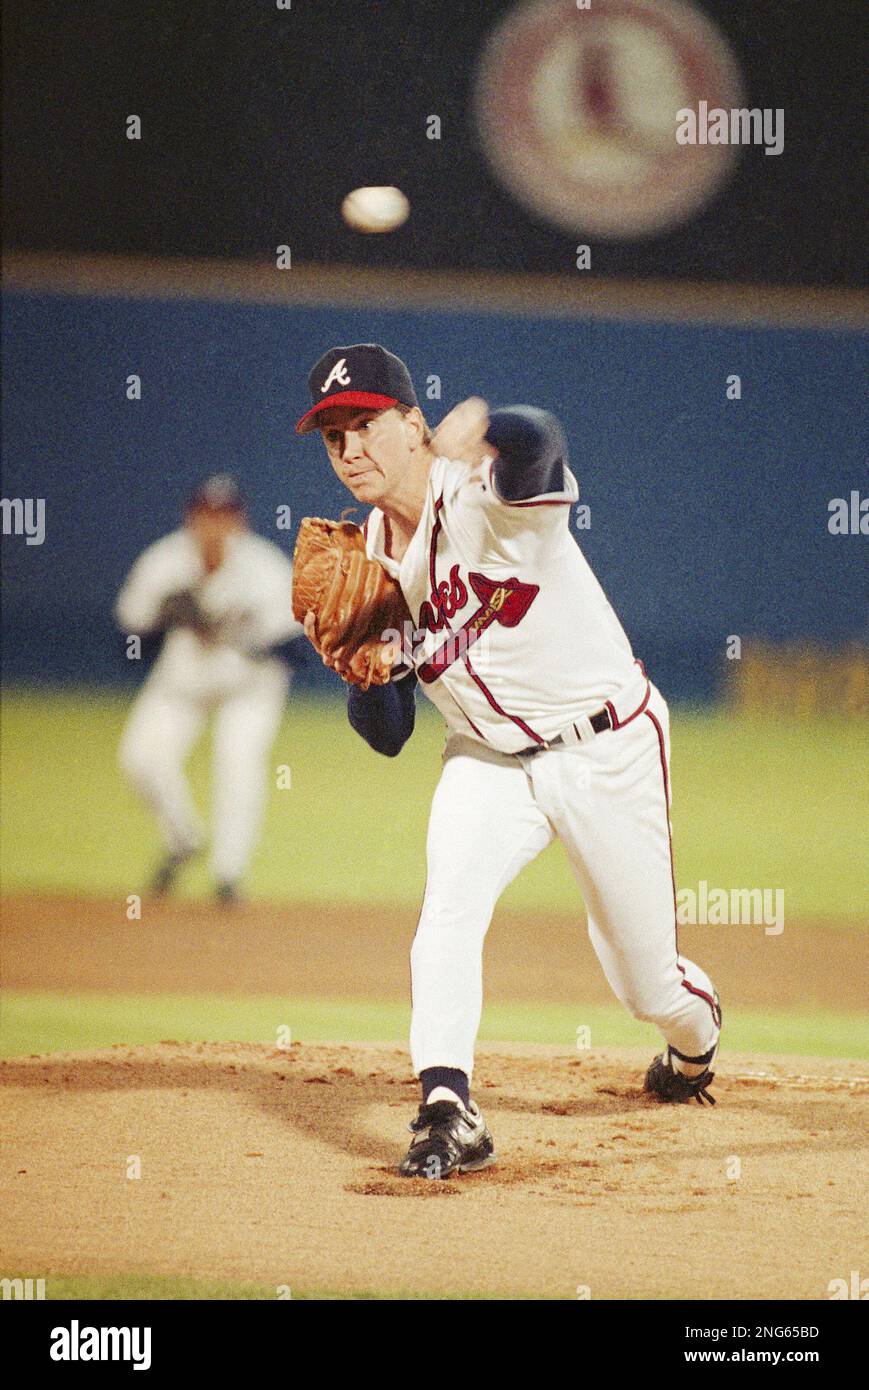 Atlanta Braves starting pitcher Tom Glavine (47) pitches against the  Minnesota Twins in the first inning